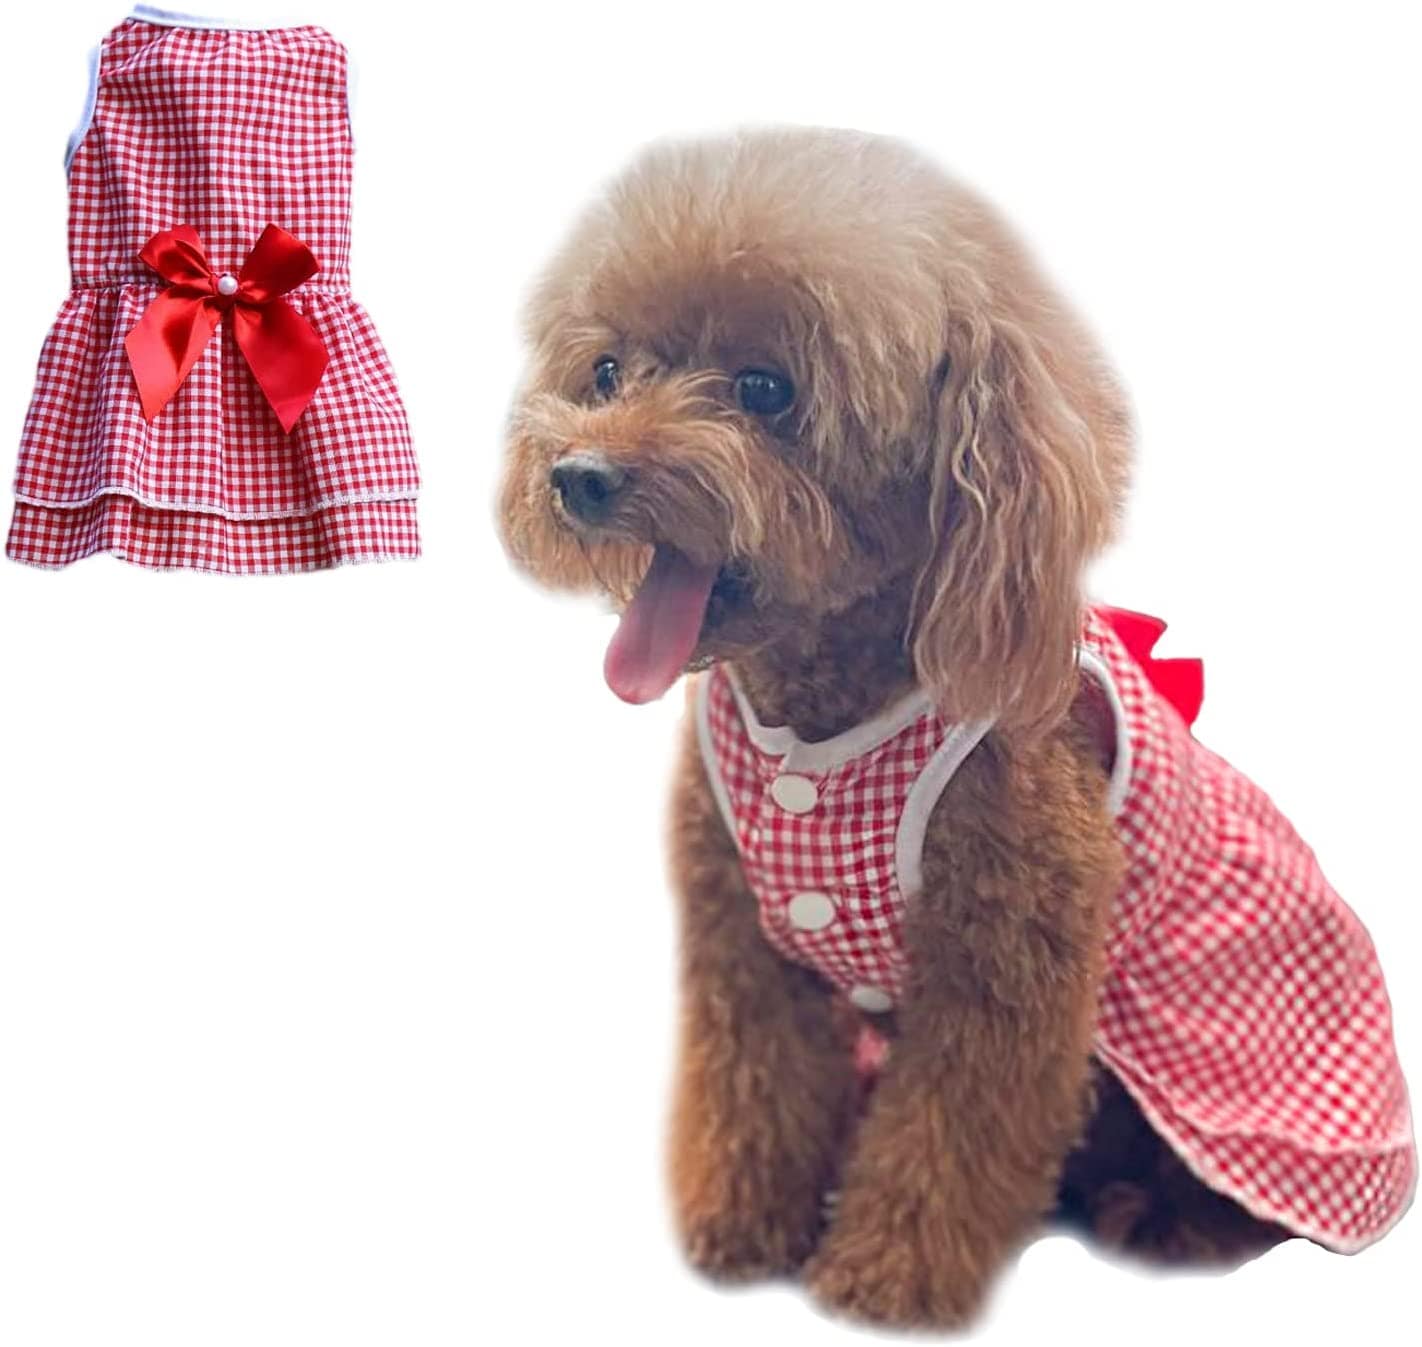 Buy KUTKUT Stripe Dress for Small Dog Girl Puppy Clothes Female